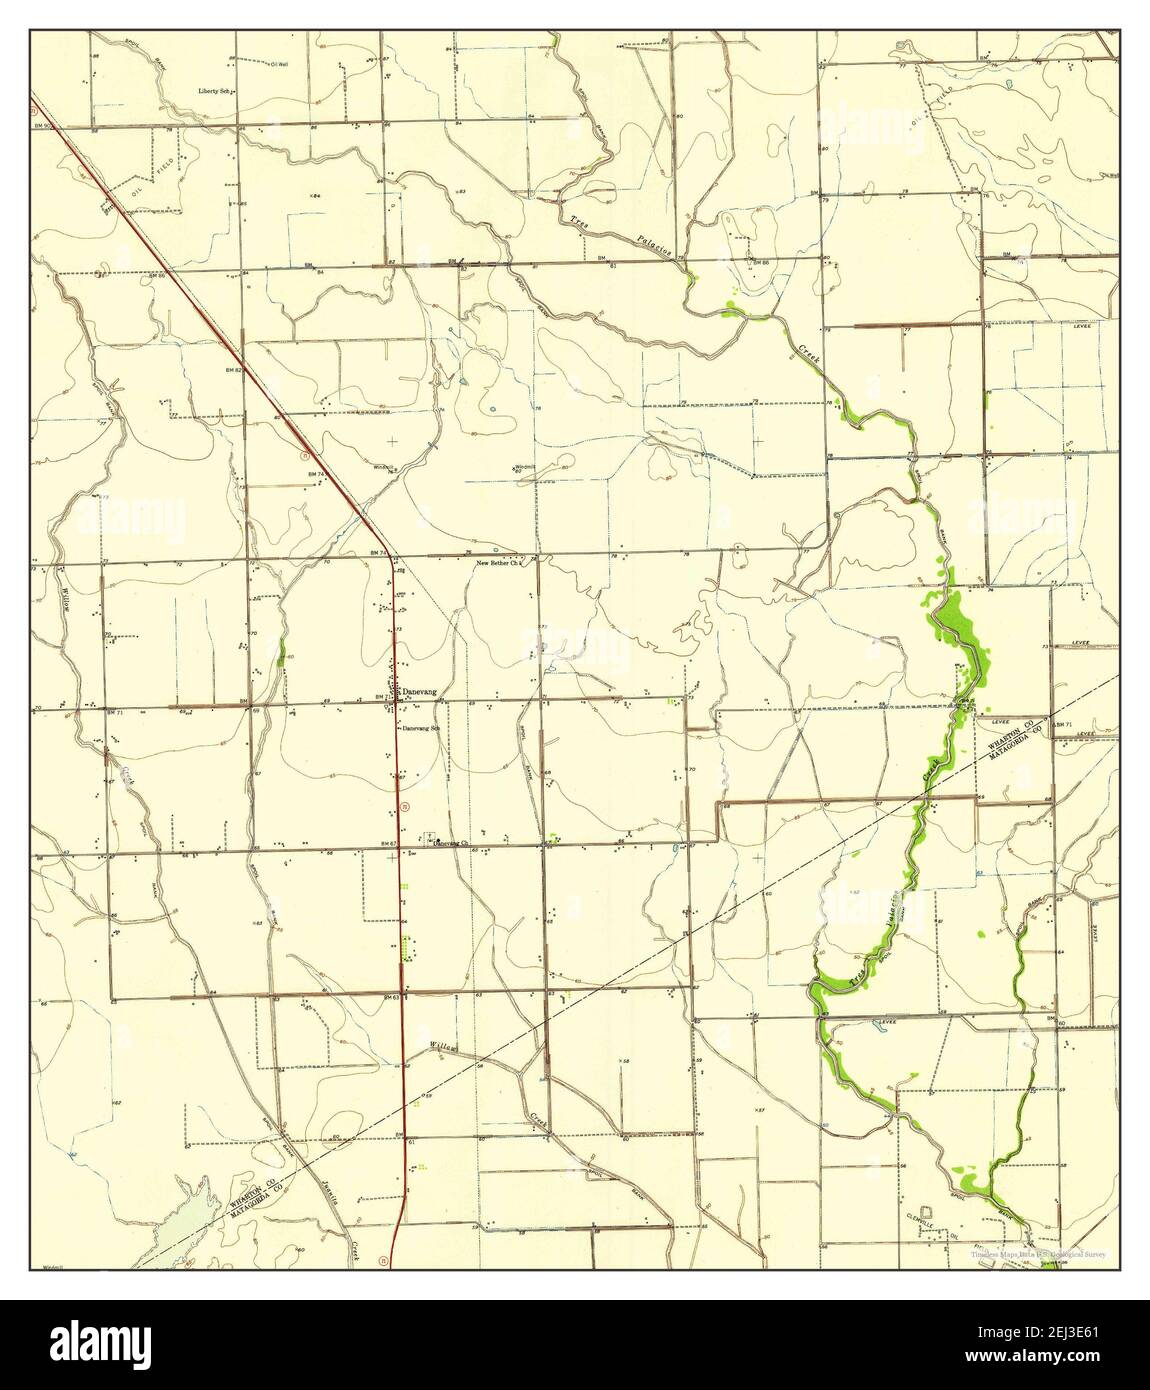 Danevang, Texas, map 1951, 1:24000, United States of America by Timeless Maps, data U.S. Geological Survey Stock Photo